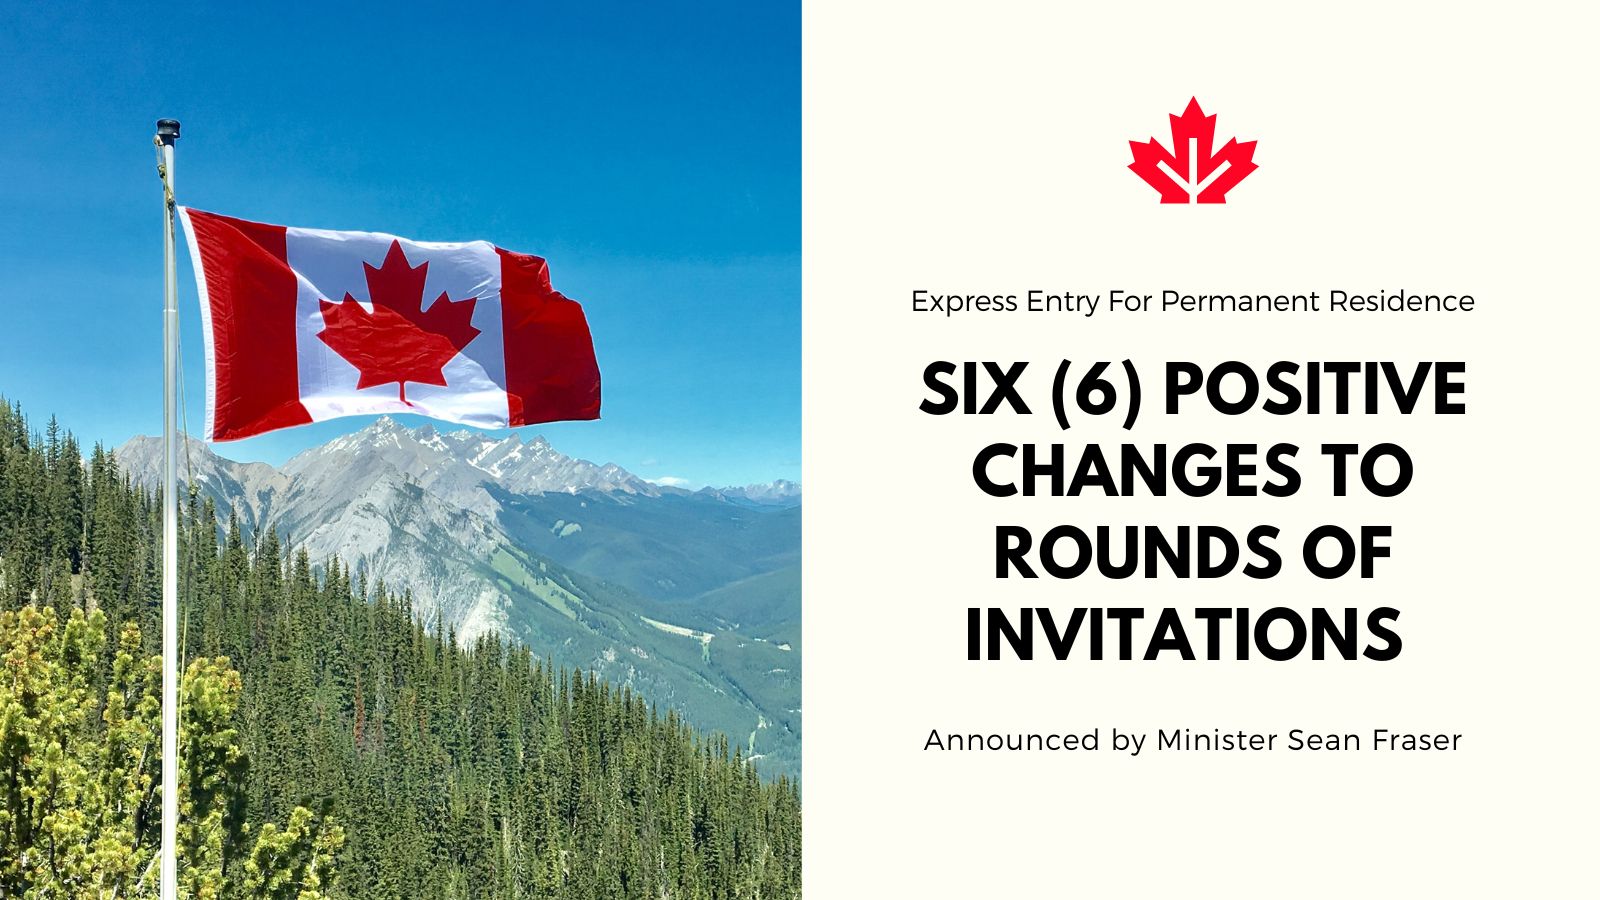 6 Positive Changes to Canada Express Entry Invitations for Permanent Residence